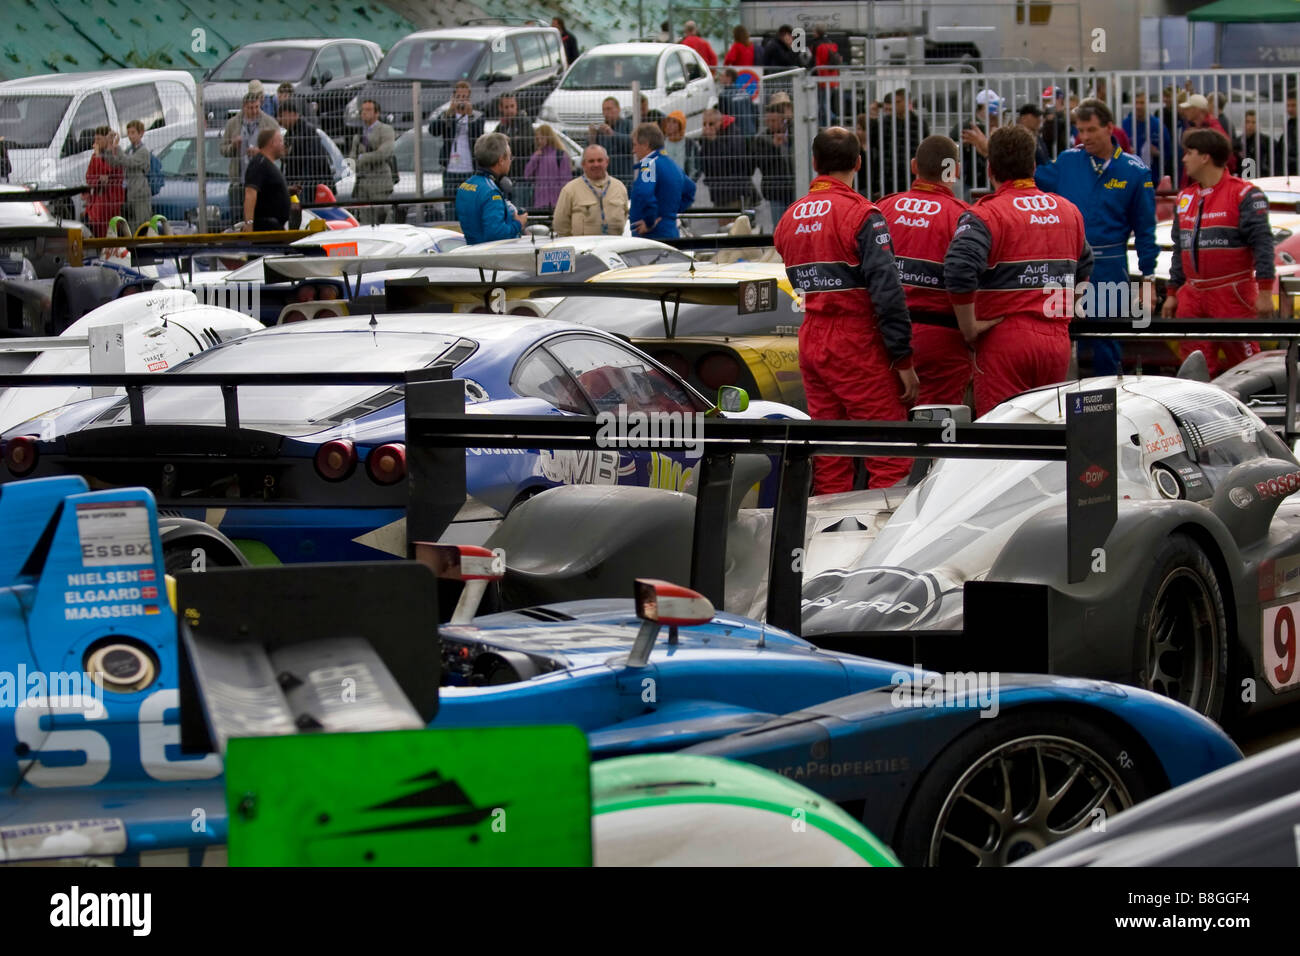 The 24-Hour Le Man racing cars parked together at the end of the race with members of the Audi team talking to officials. Stock Photo